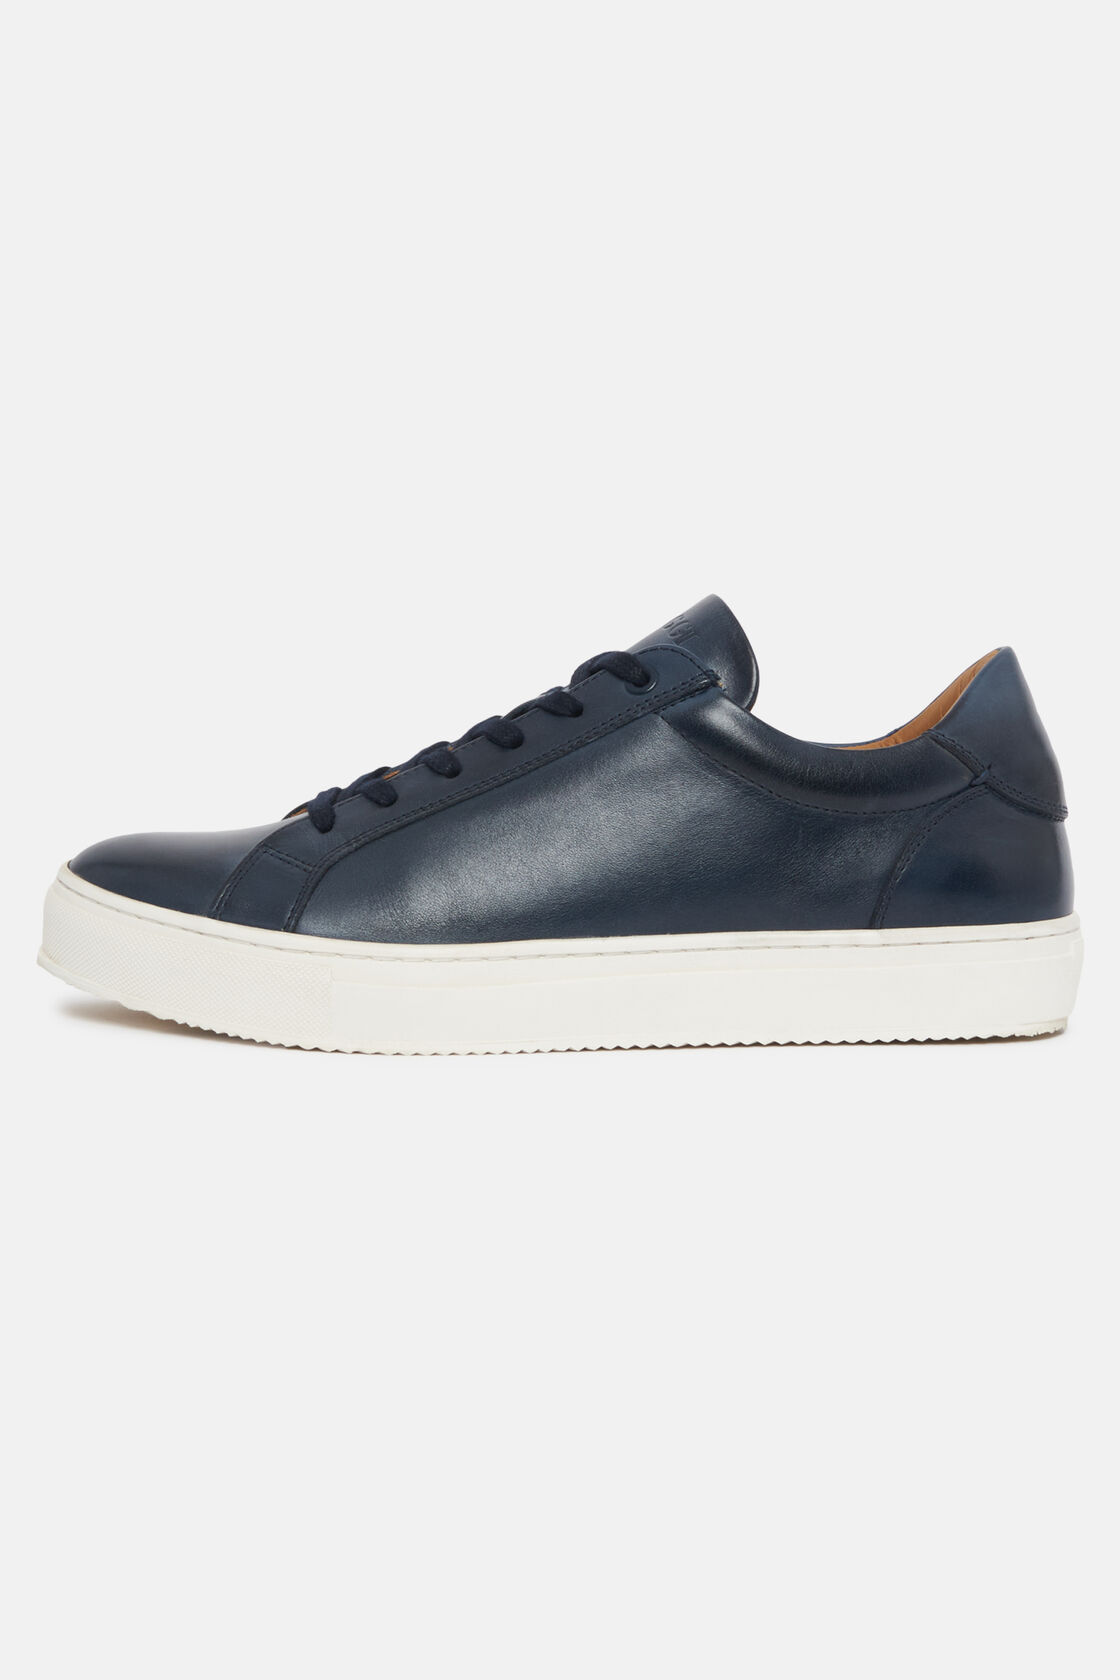 Navy Leather Trainers, Navy blue, hi-res